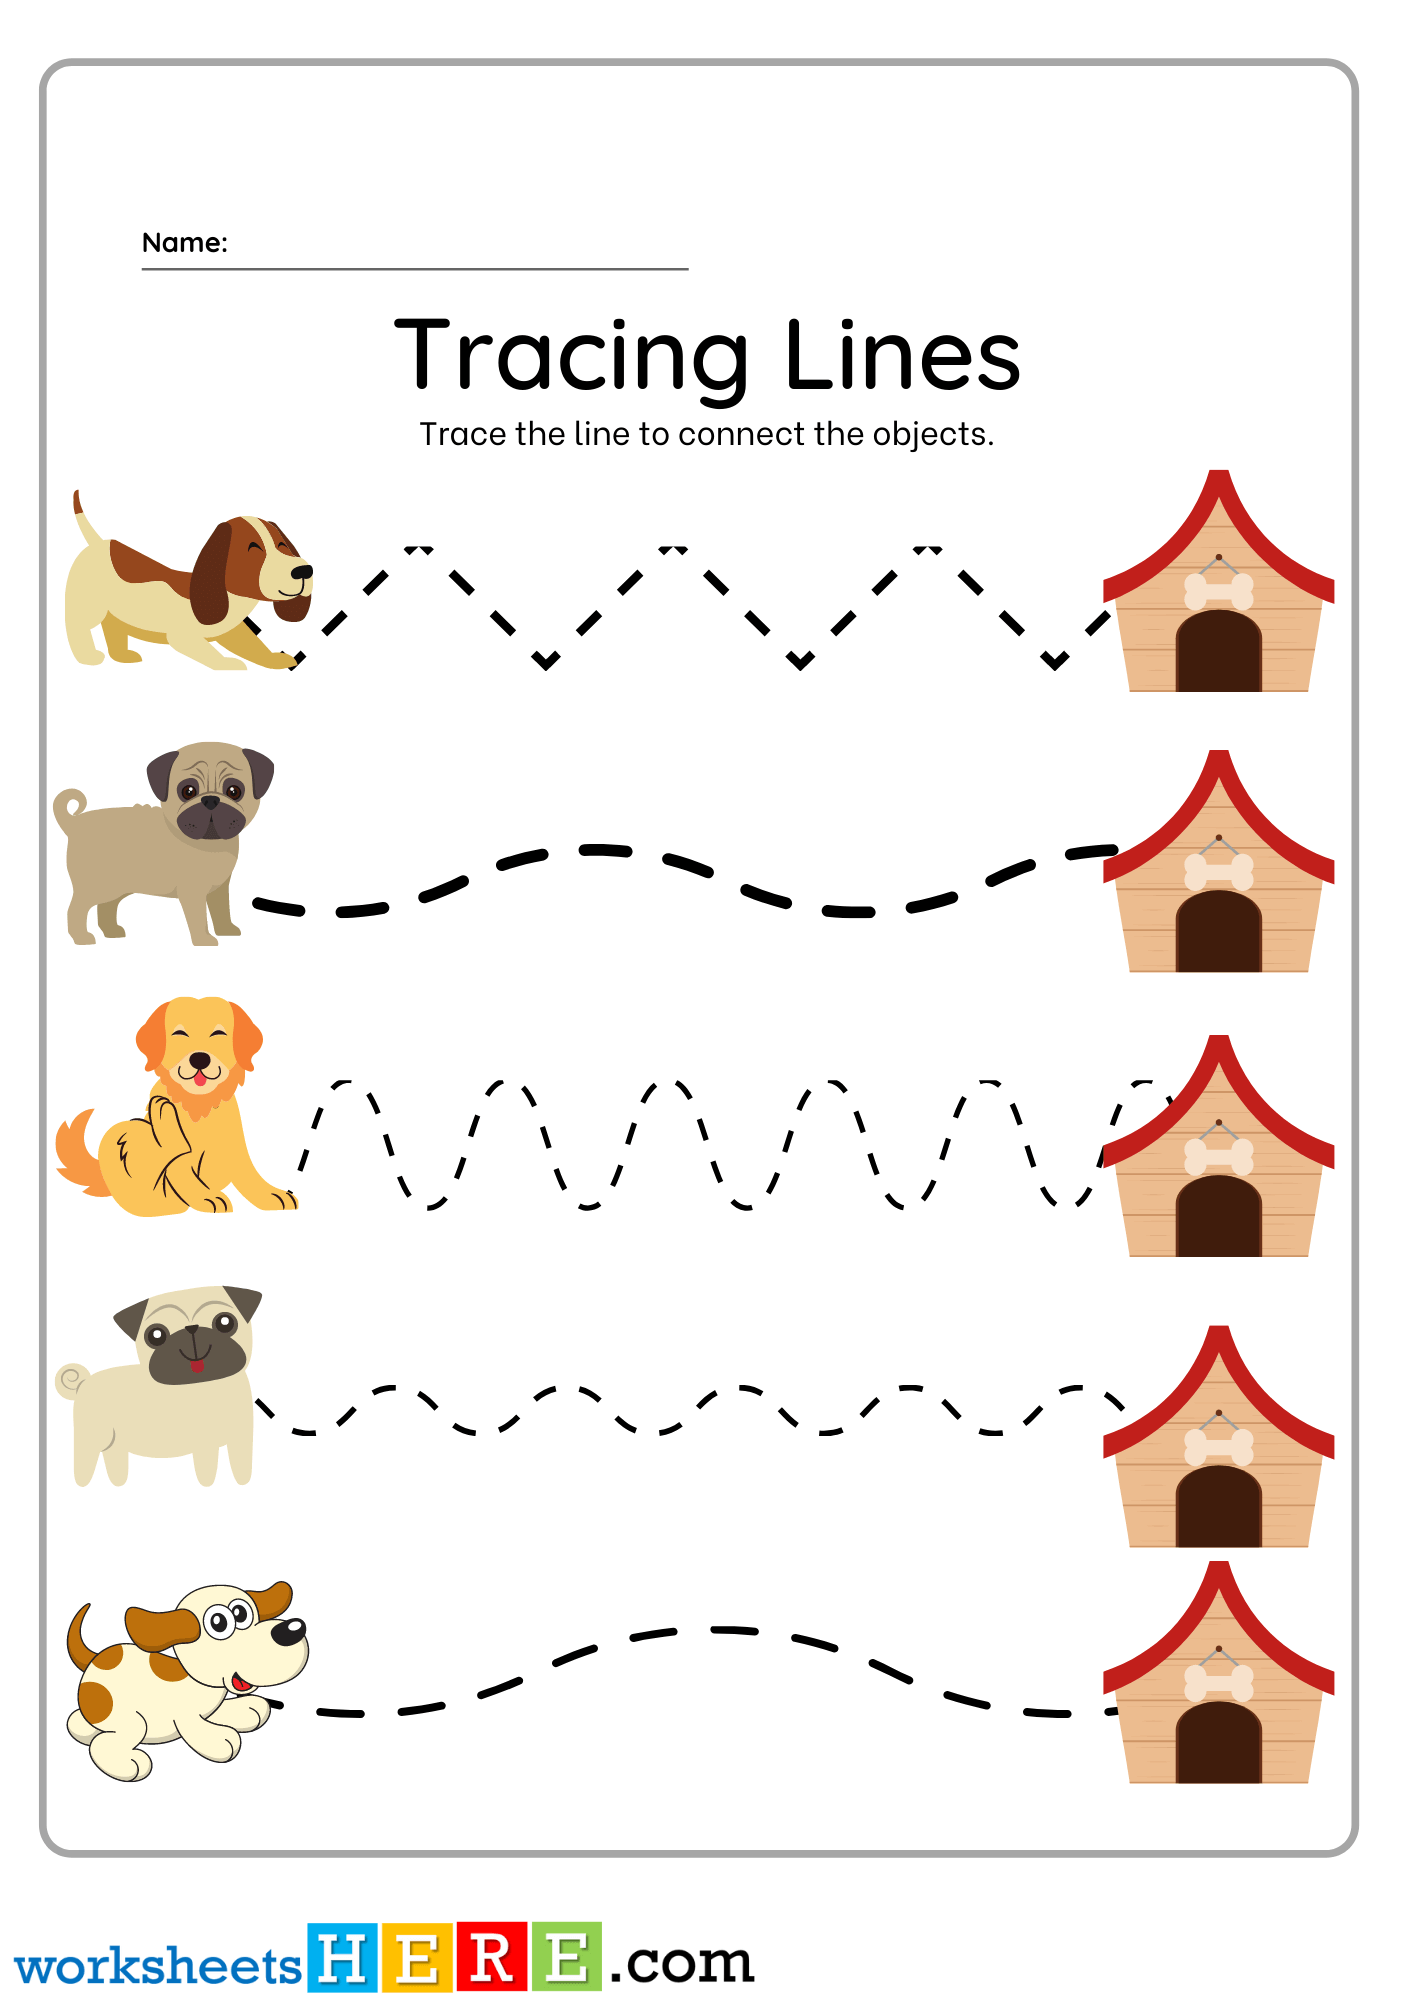 Tracing Lines Worksheet, Trace the Lines with Dogs and Kennel PDF Worksheet For Kids